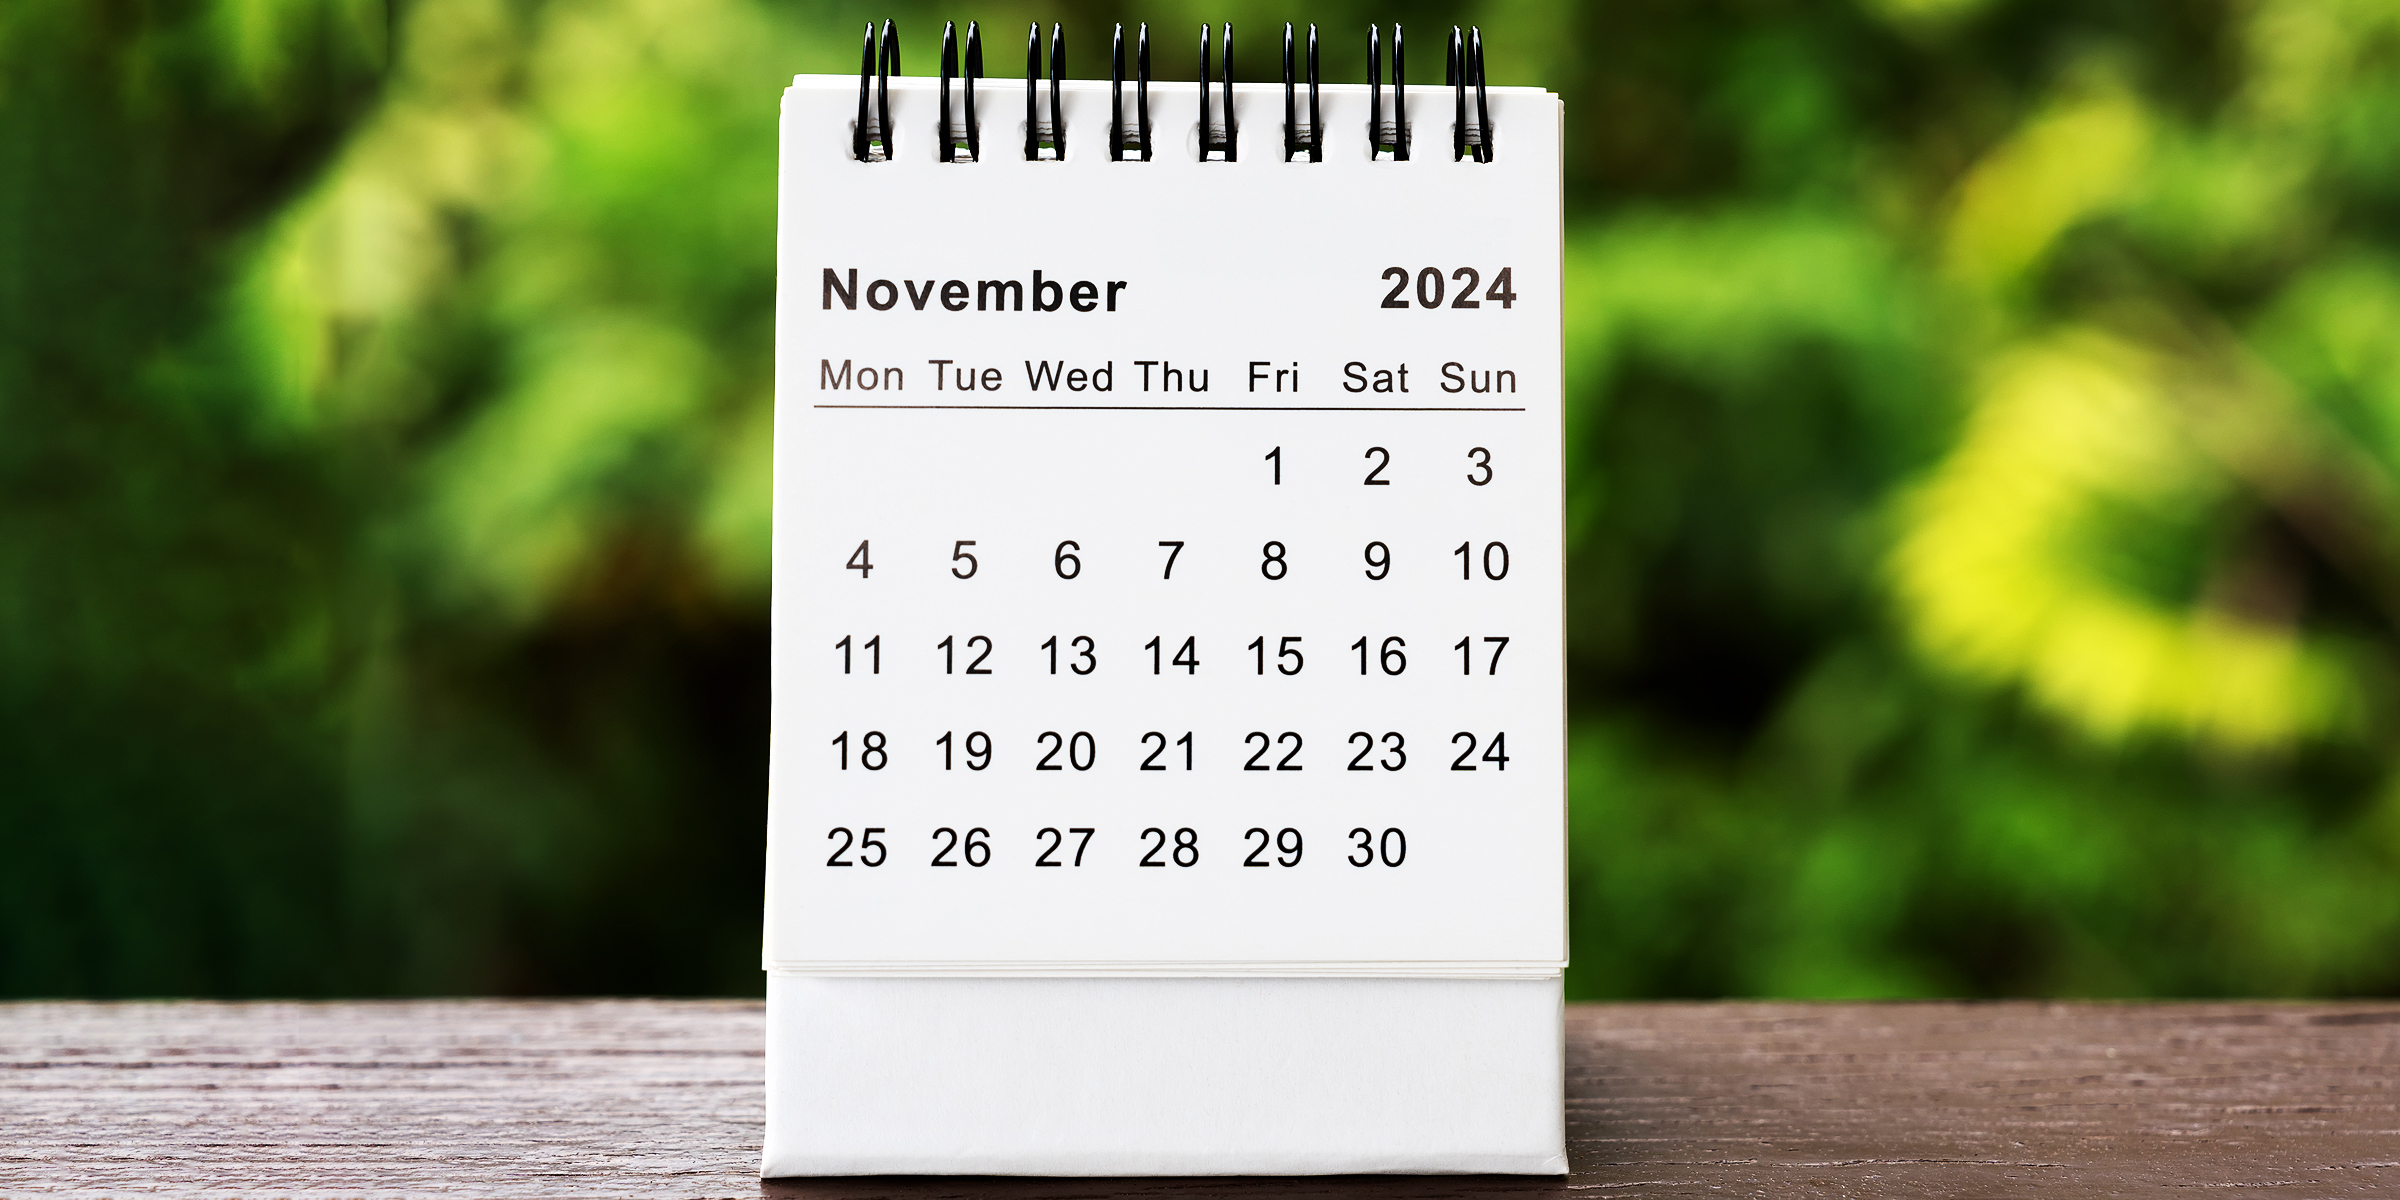 A calendar for the month of November | Source: Getty Images